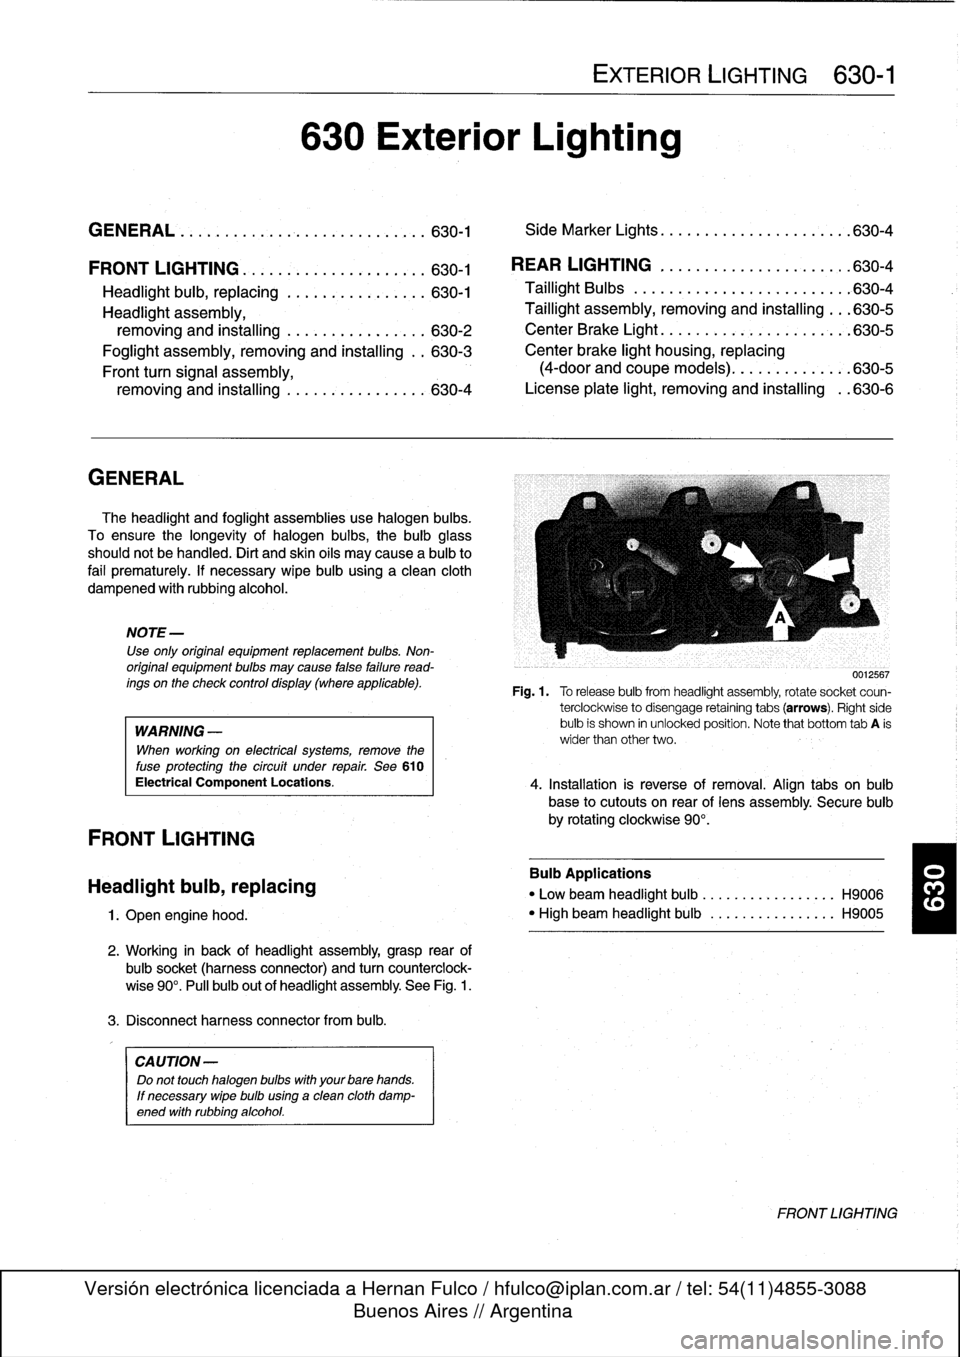 BMW 318i 1998 E36 Workshop Manual 
FRONT
LIGHTING
.
...........
.
....
.
.
.
.
630-1

Headlight
buib,
replacing
............
.
.
.
.
630-1
Headlight
assembly,

removing
and
installing
.......
.
....
.
.
.
.
630-2

Foglight
assembly,
r